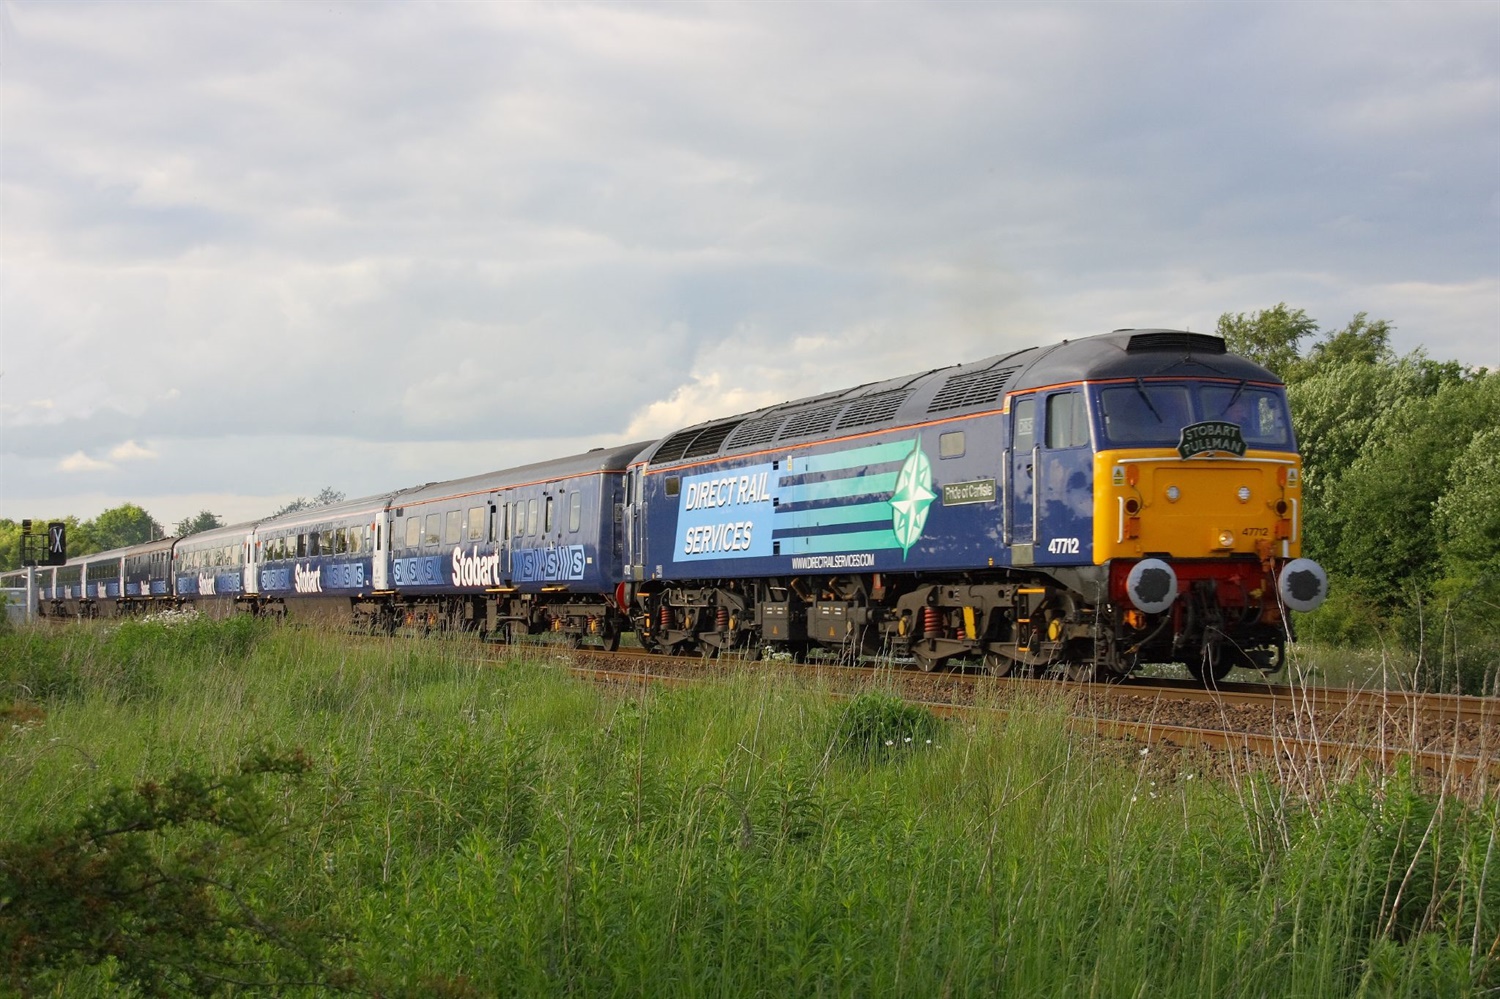 DRS to provide rolling stock for Cumbrian Coast 